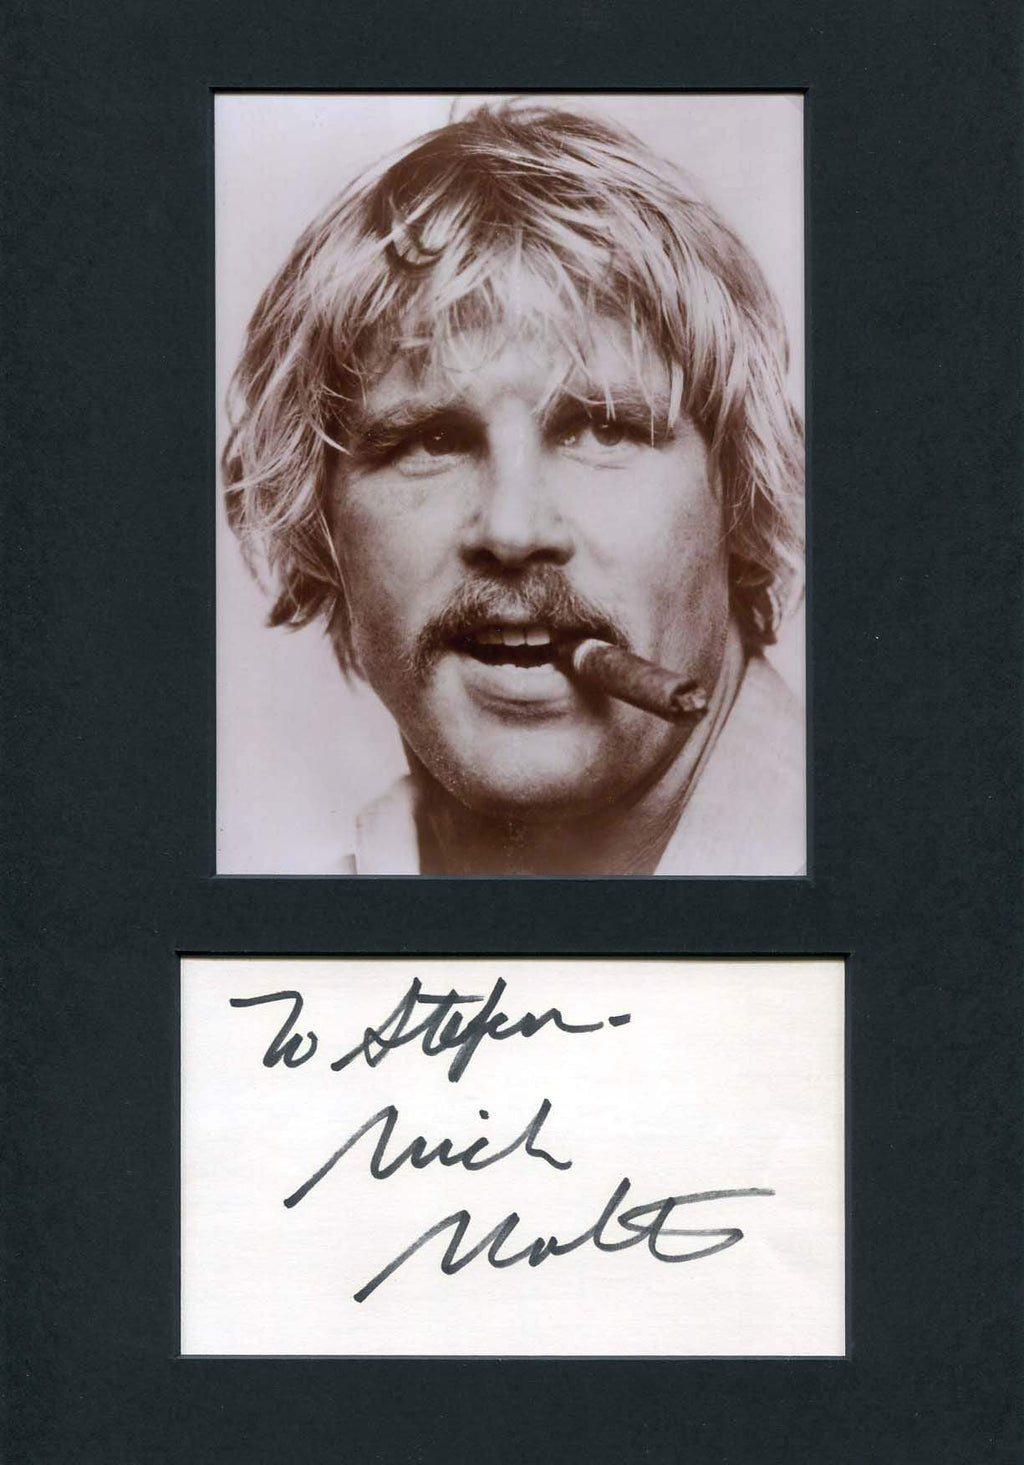 Nick autograph card mounted